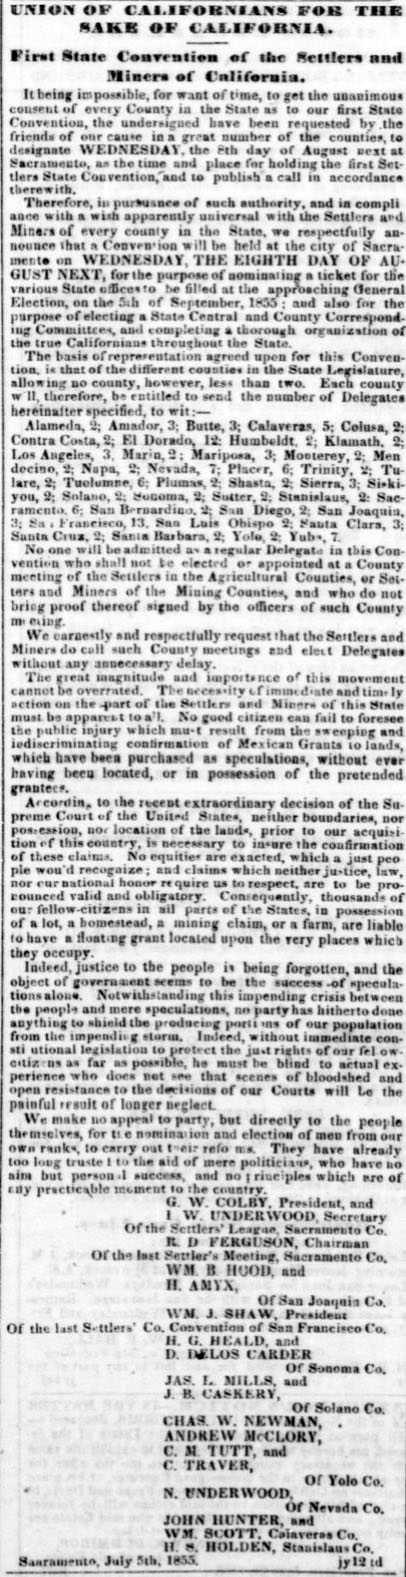 Union of Californians, July 12, 1855, Daily Alta California.